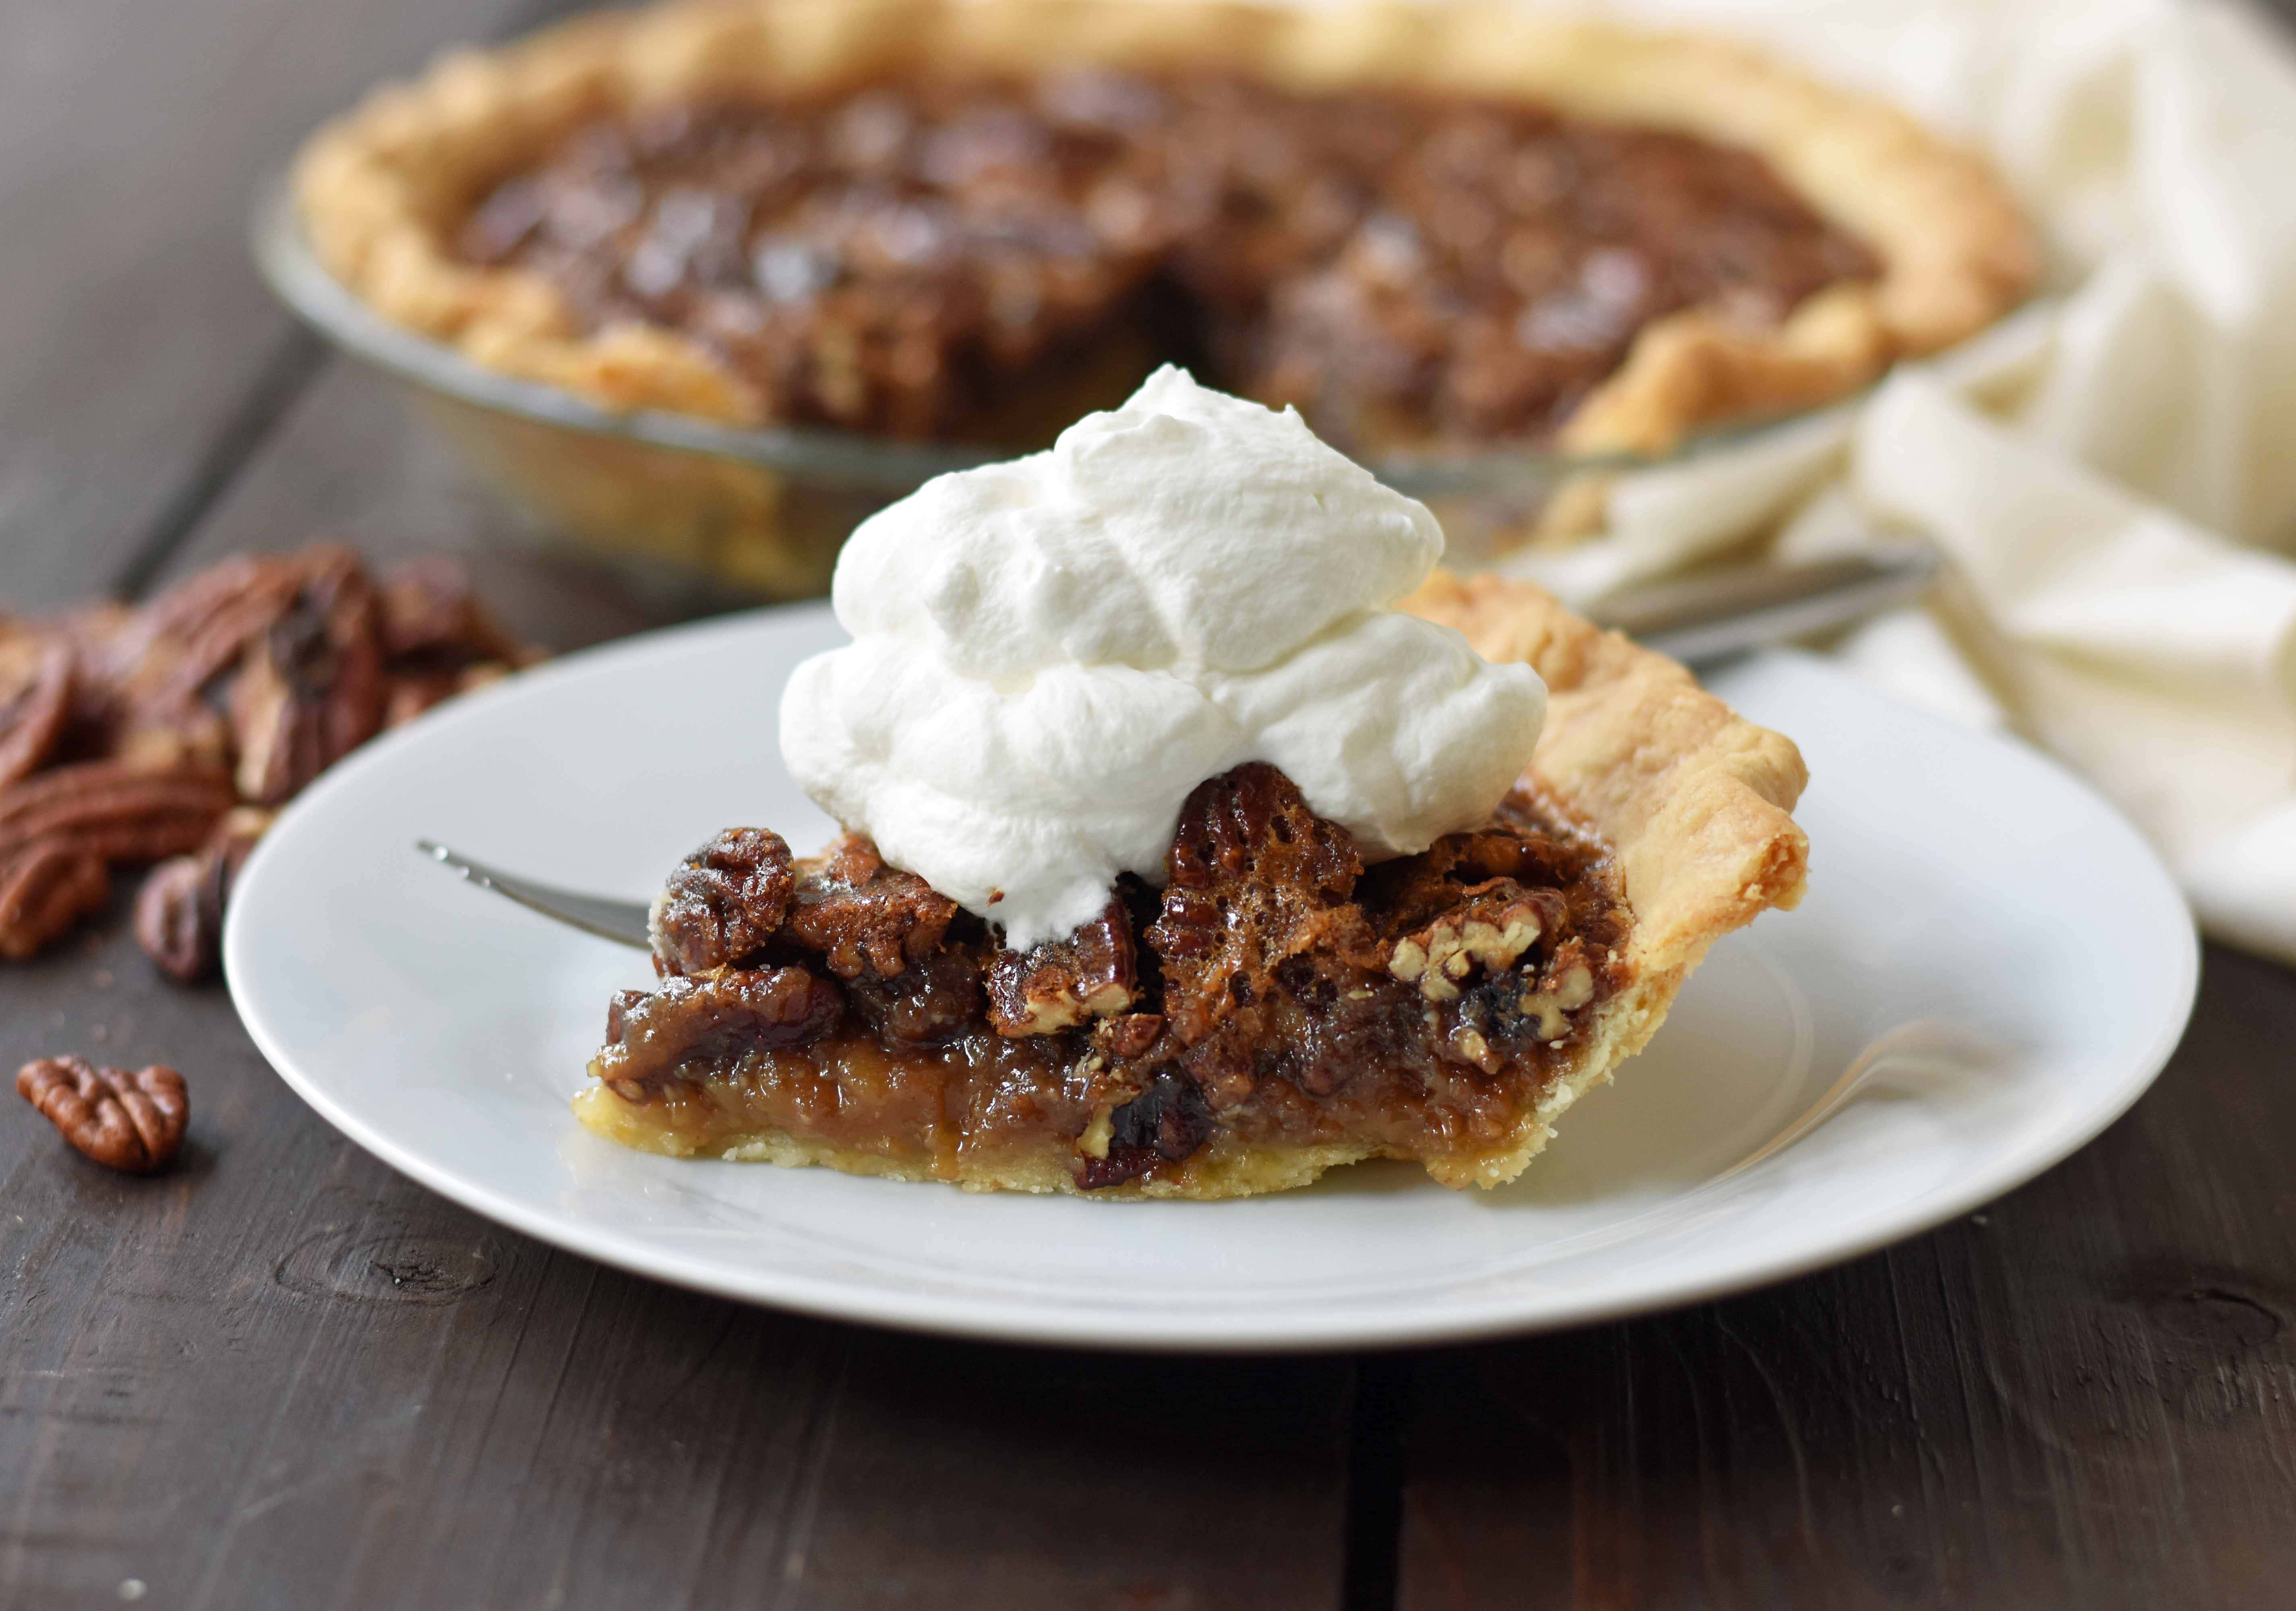 Old-Fashioned Pecan Pie made with a silky smooth brown sugar butter filling with crunchy pecans. Baked in a buttery flaky pie crust and topped with homemade whipped cream. A classic Southern Pecan Pie recipe. www.modernhoney.com